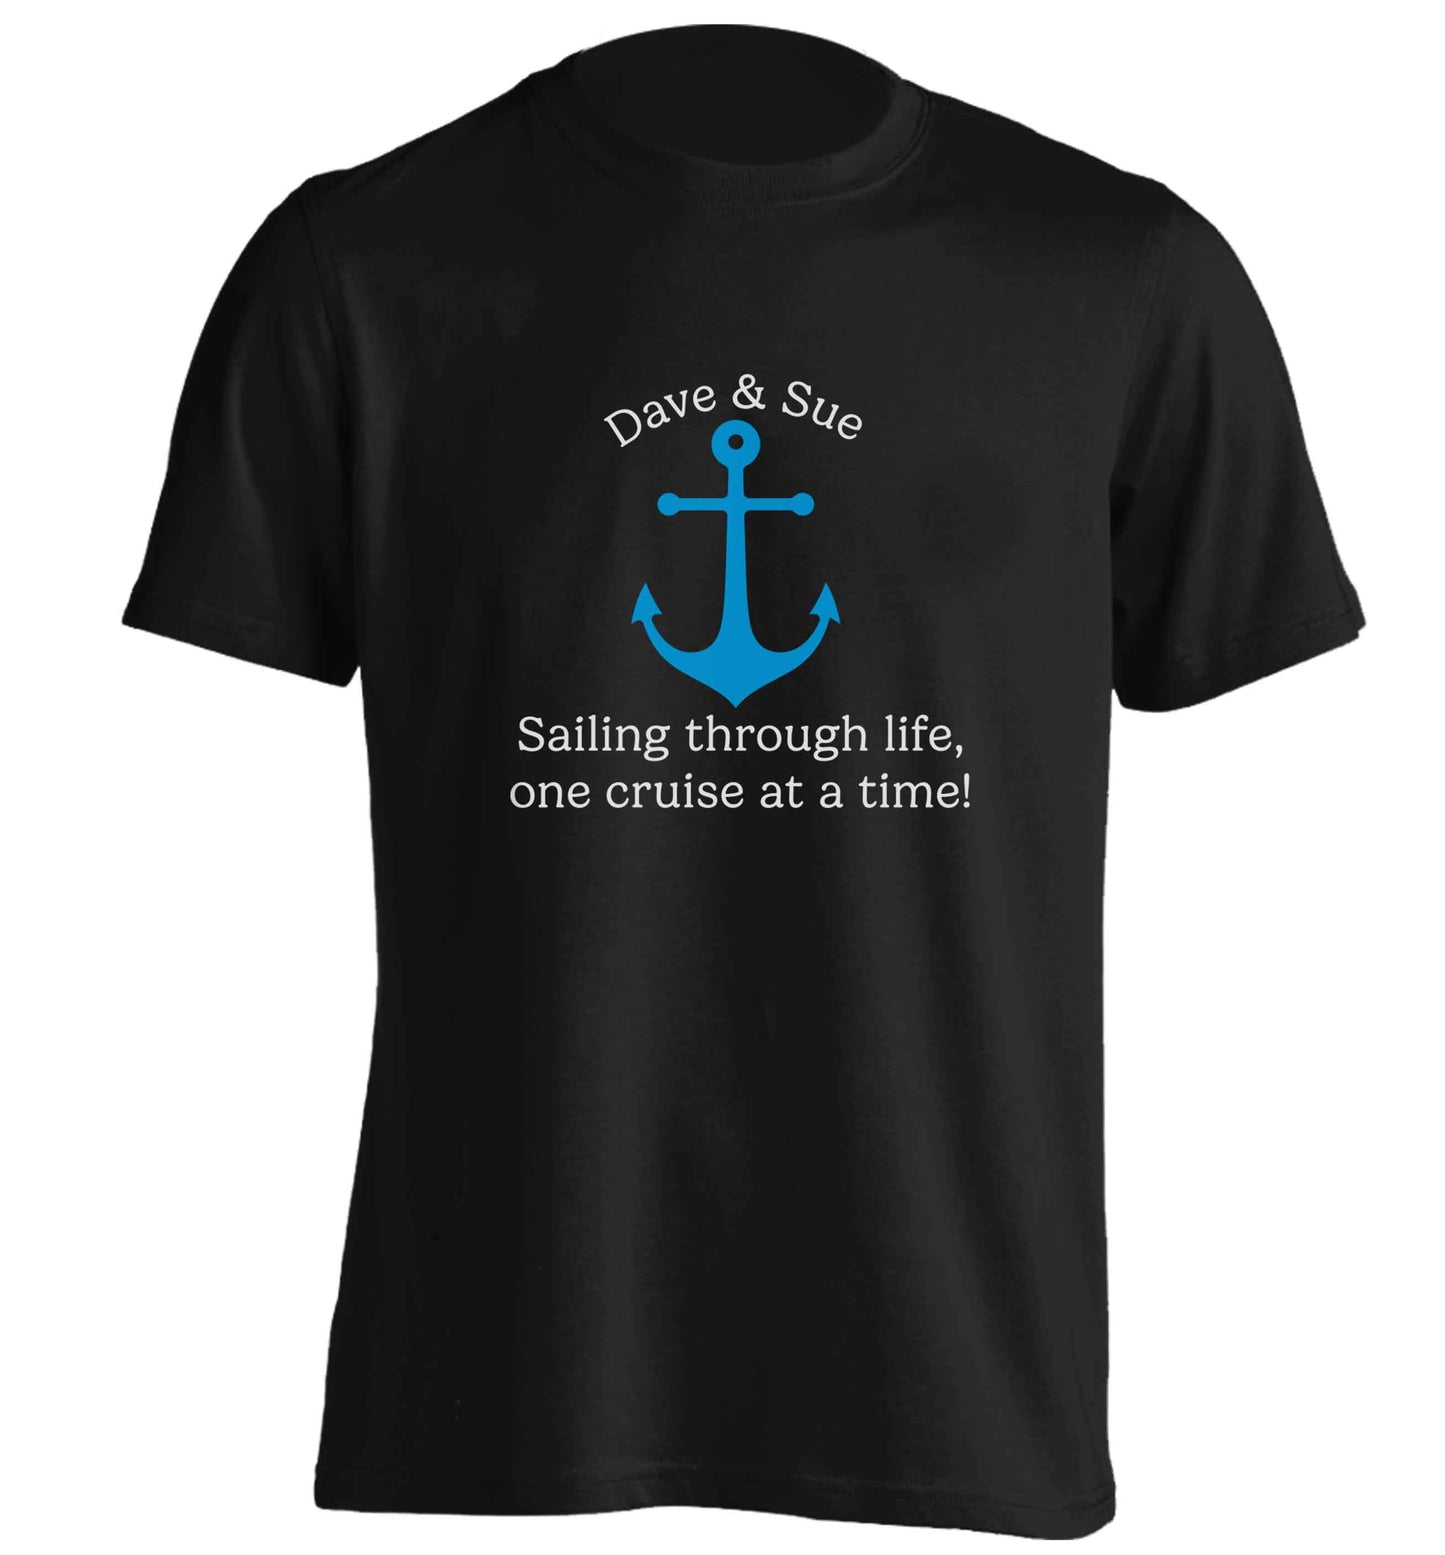 Sailing through life one cruise at a time - personalised adults unisex black Tshirt 2XL